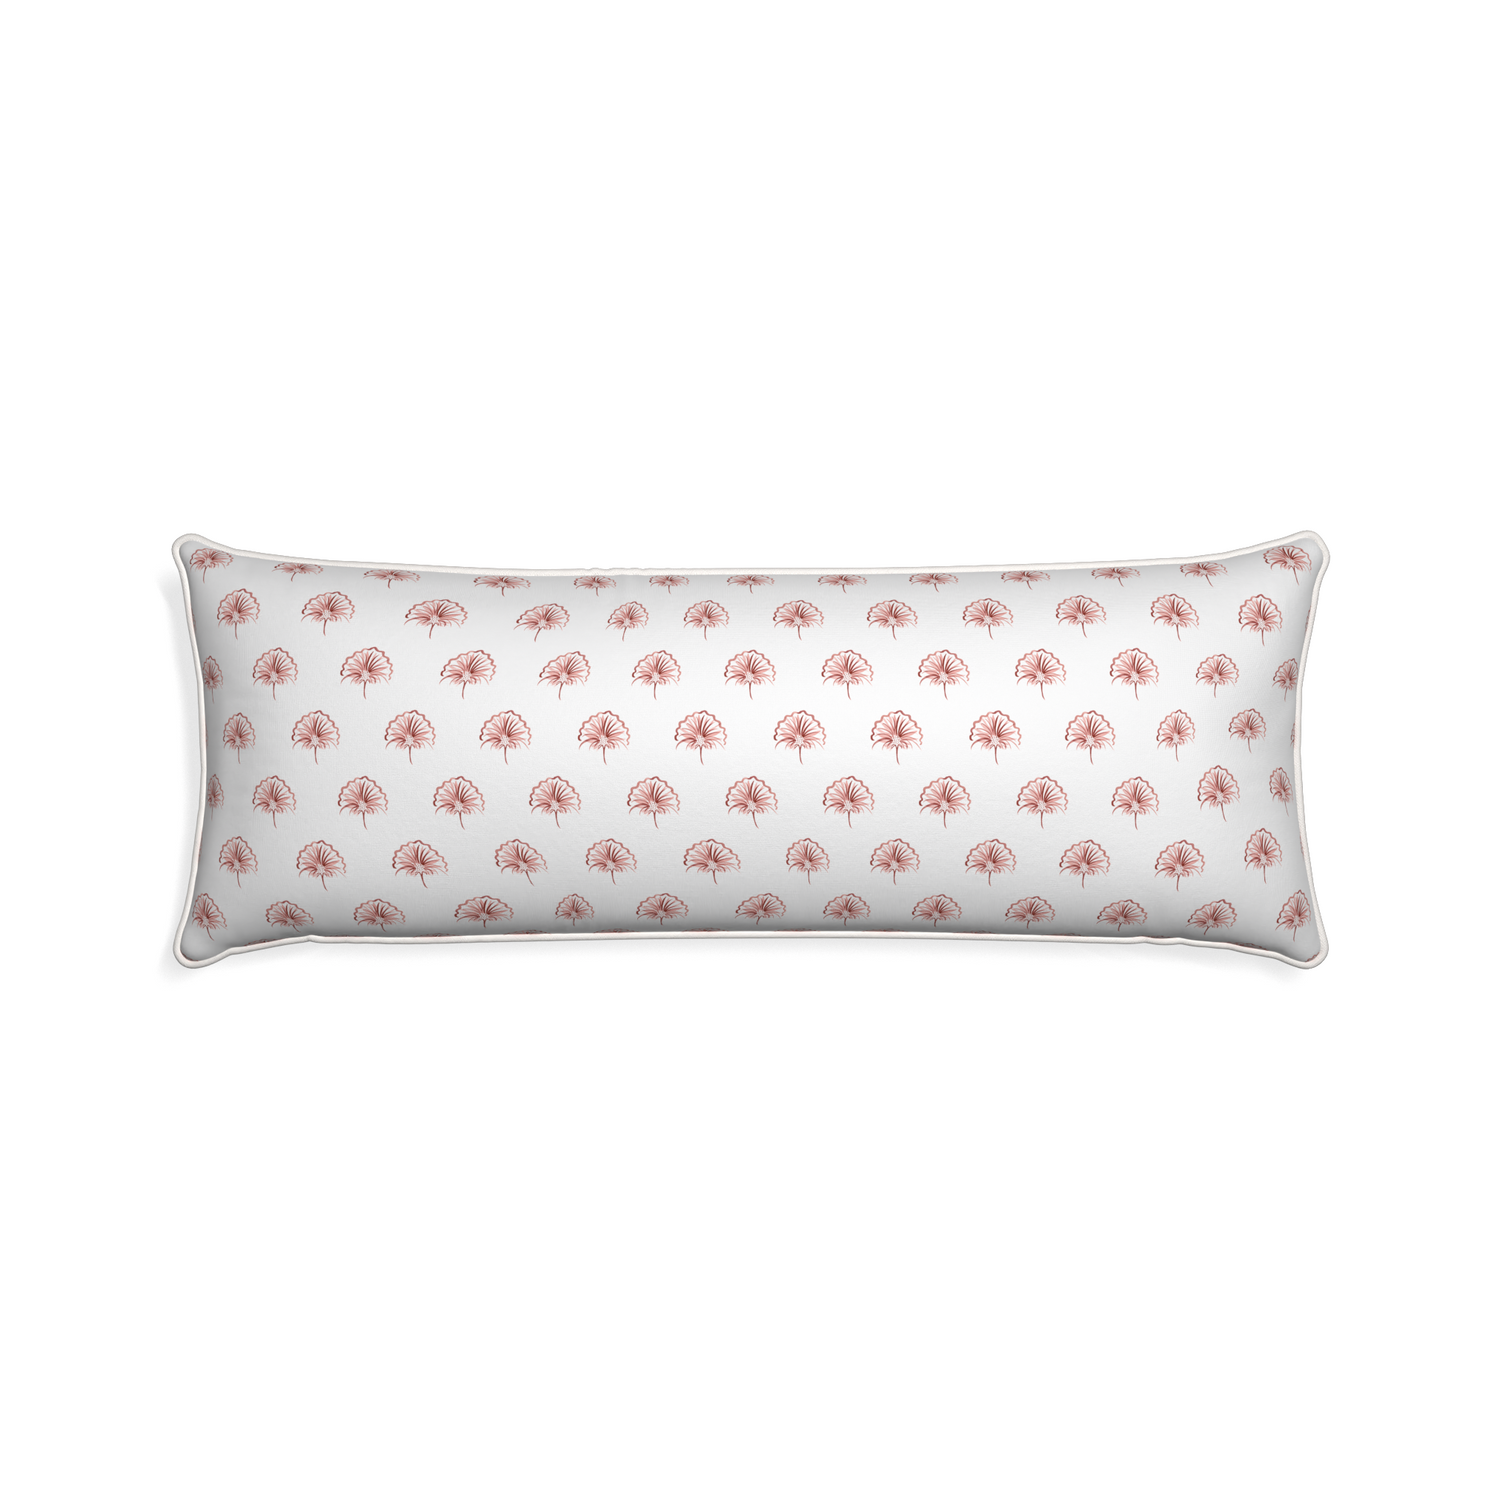 Xl-lumbar penelope rose custom floral pinkpillow with snow piping on white background